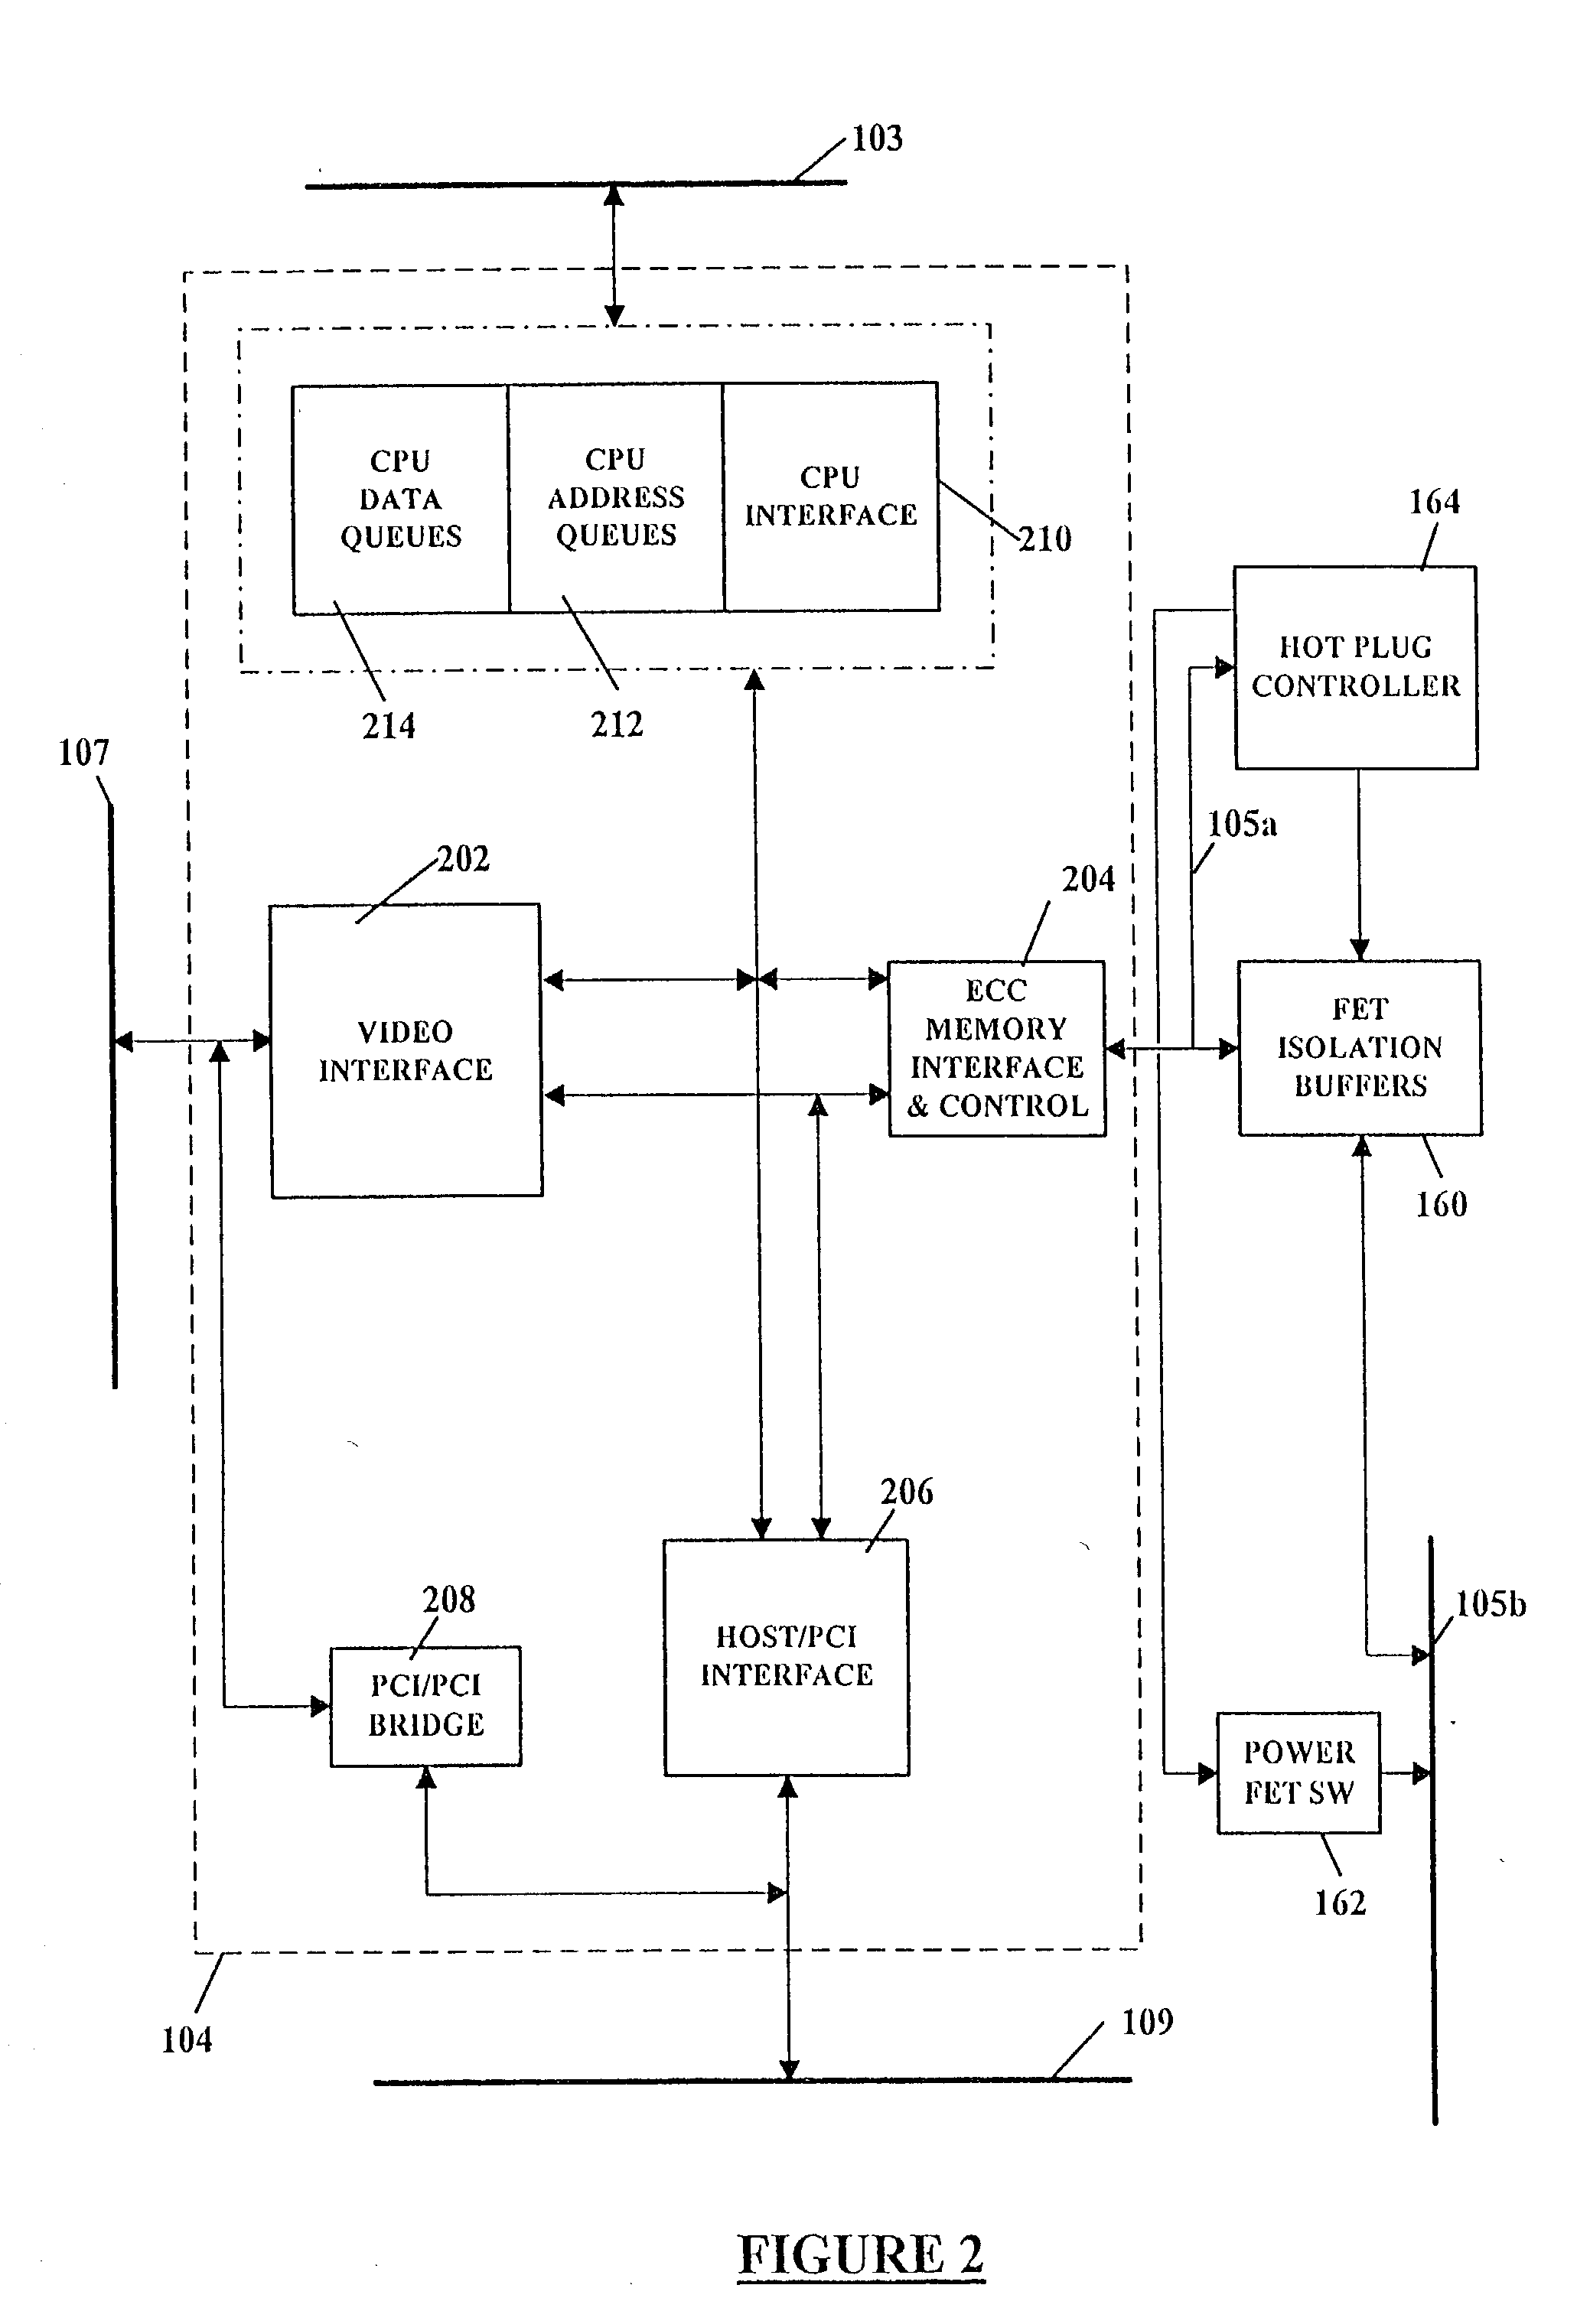 Replacement, upgrade and/or addition of hot-pluggable components in a computer system